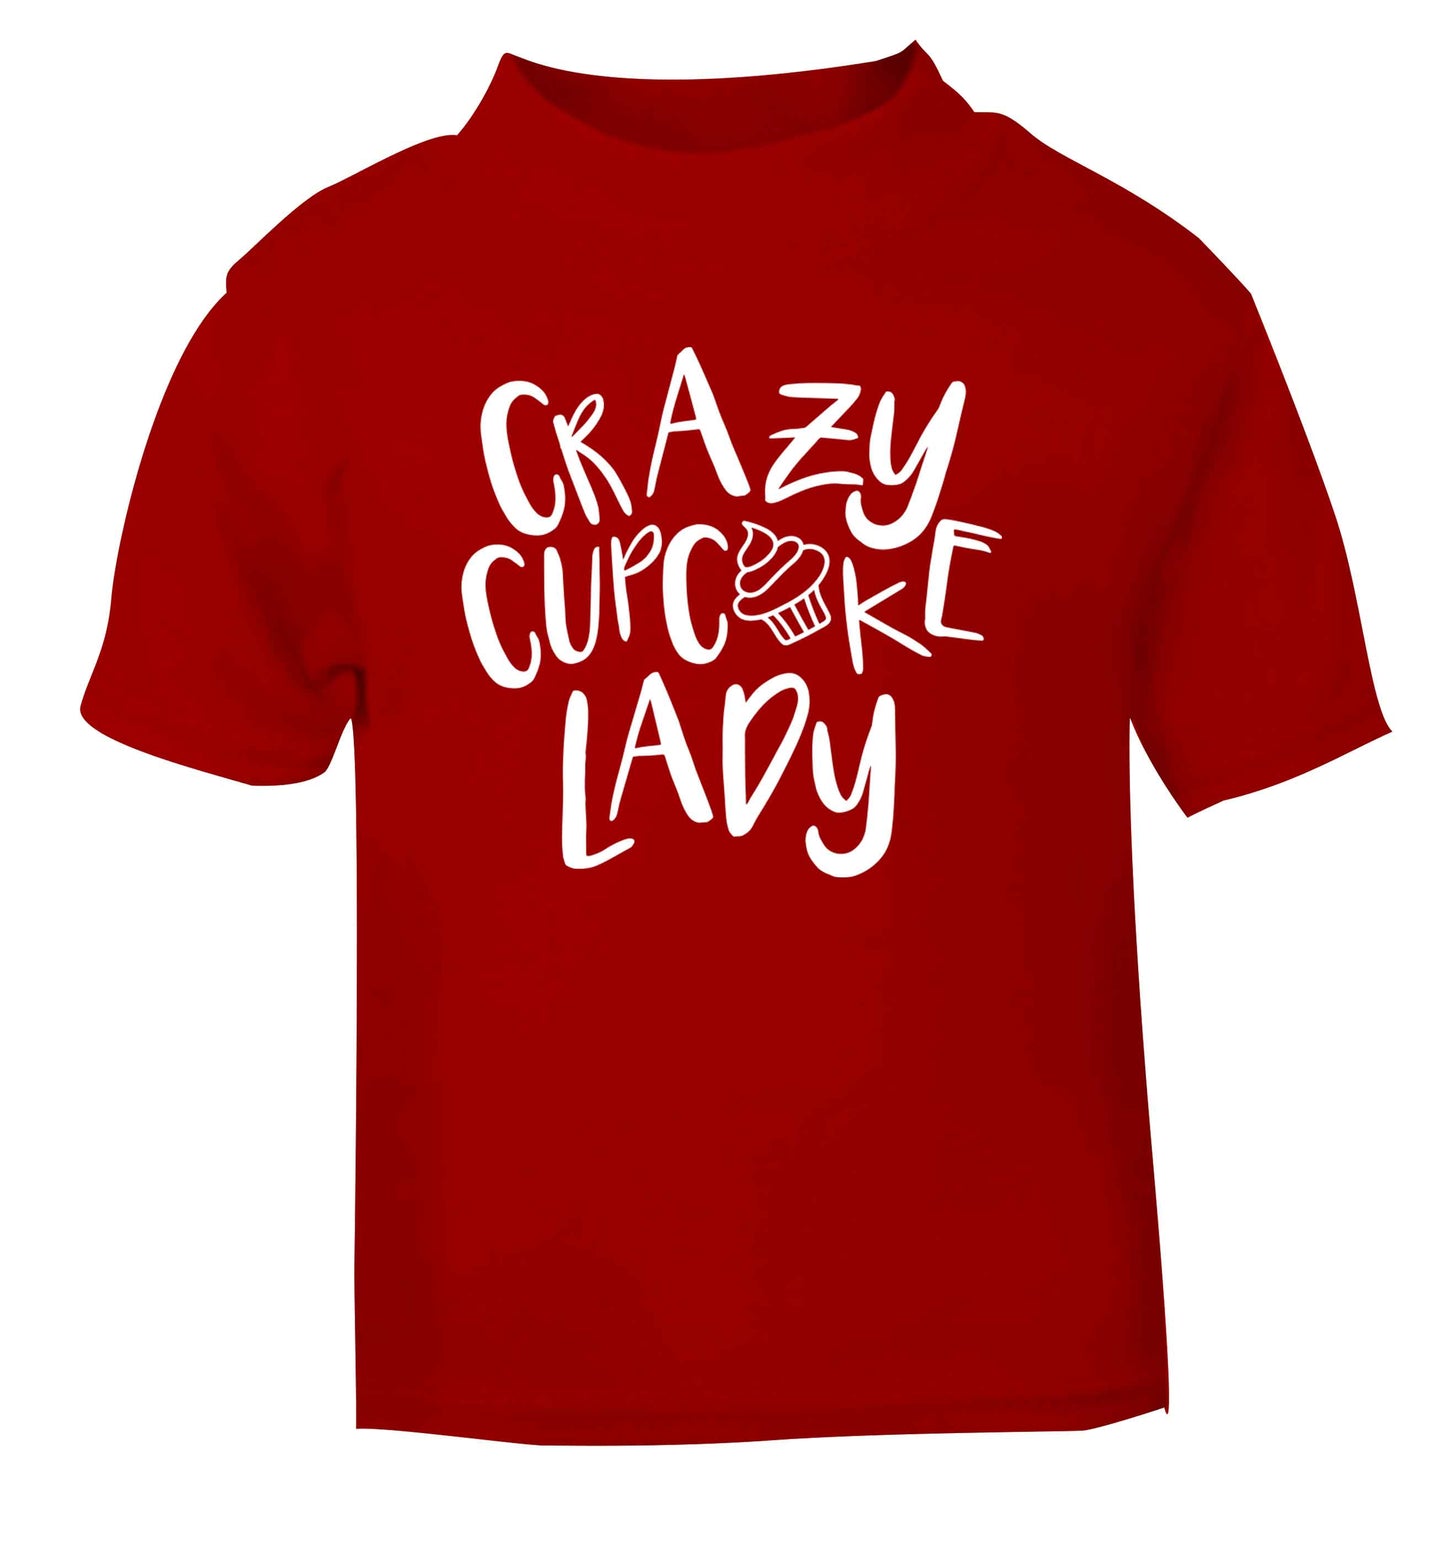 Crazy cupcake lady red Baby Toddler Tshirt 2 Years